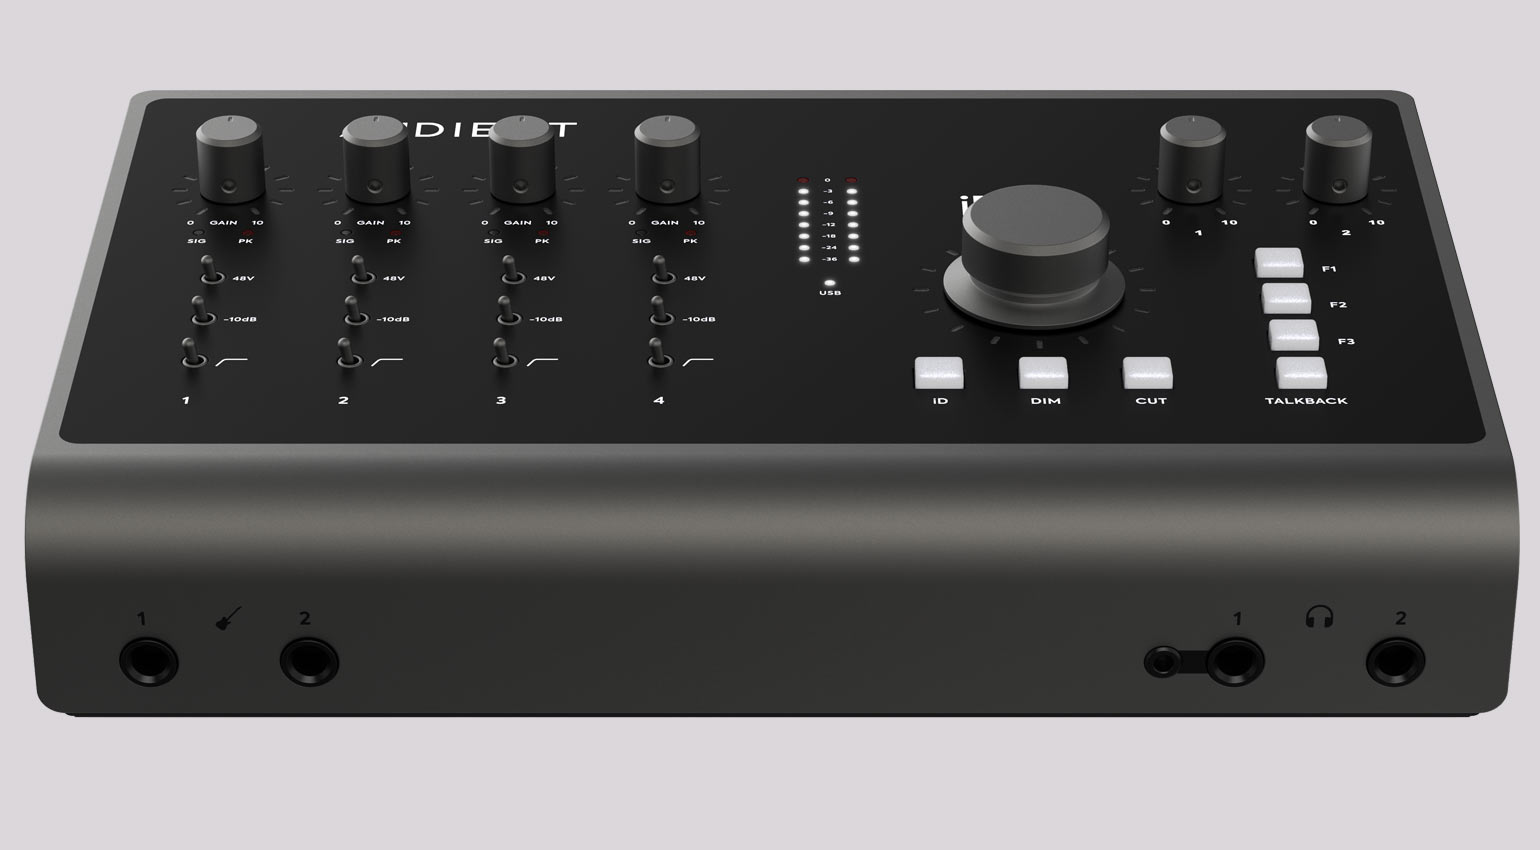 Audient iD44 MKII audio interface brings the upgrades - gearnews.com